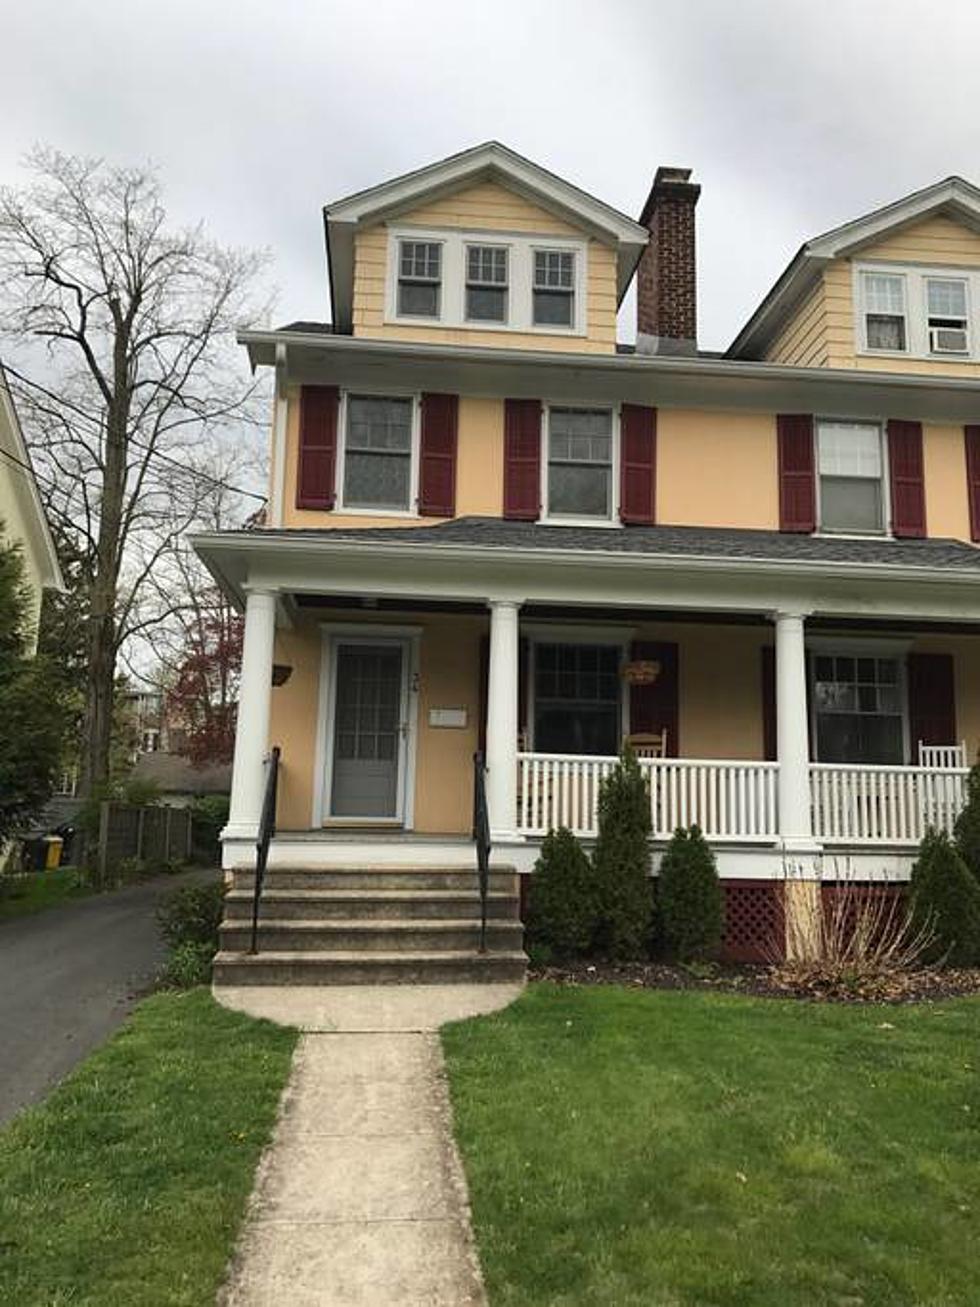 This Mercer County Airbnb Rental Costs More Than $2,000 Per Night